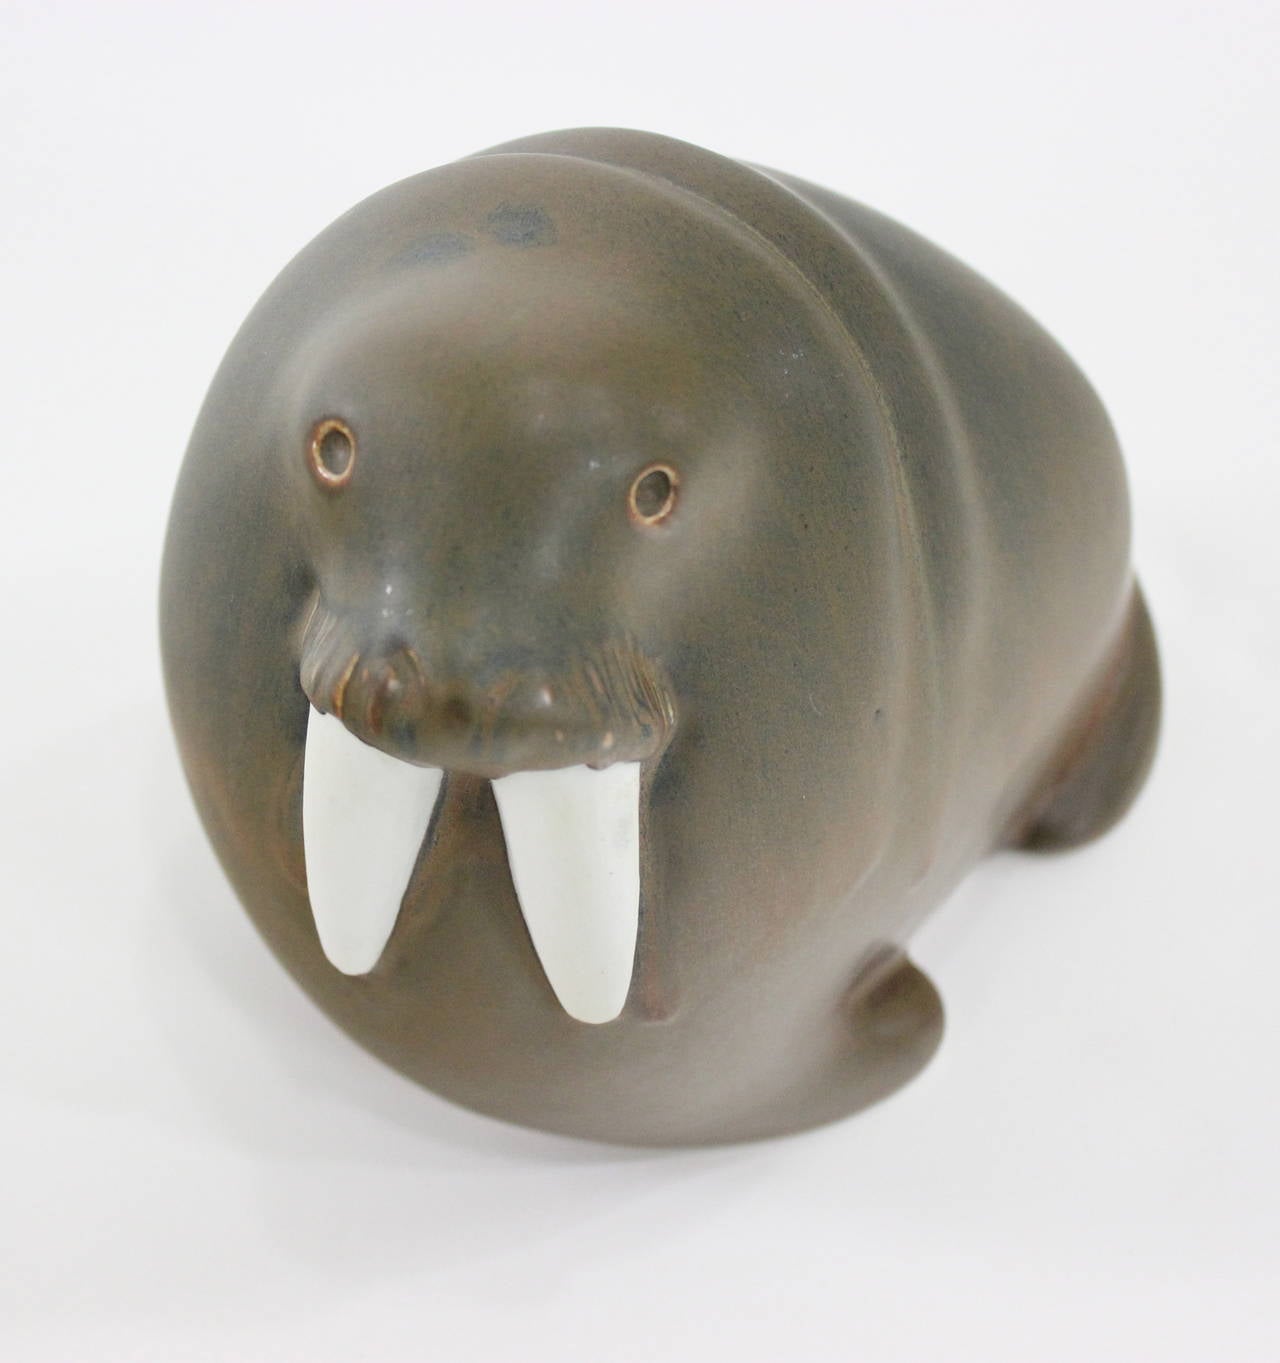 Walrus figure by Arabia.
Porcelain.
Made in Finland.
Matchless quality and price.
Low freight, quick ship.